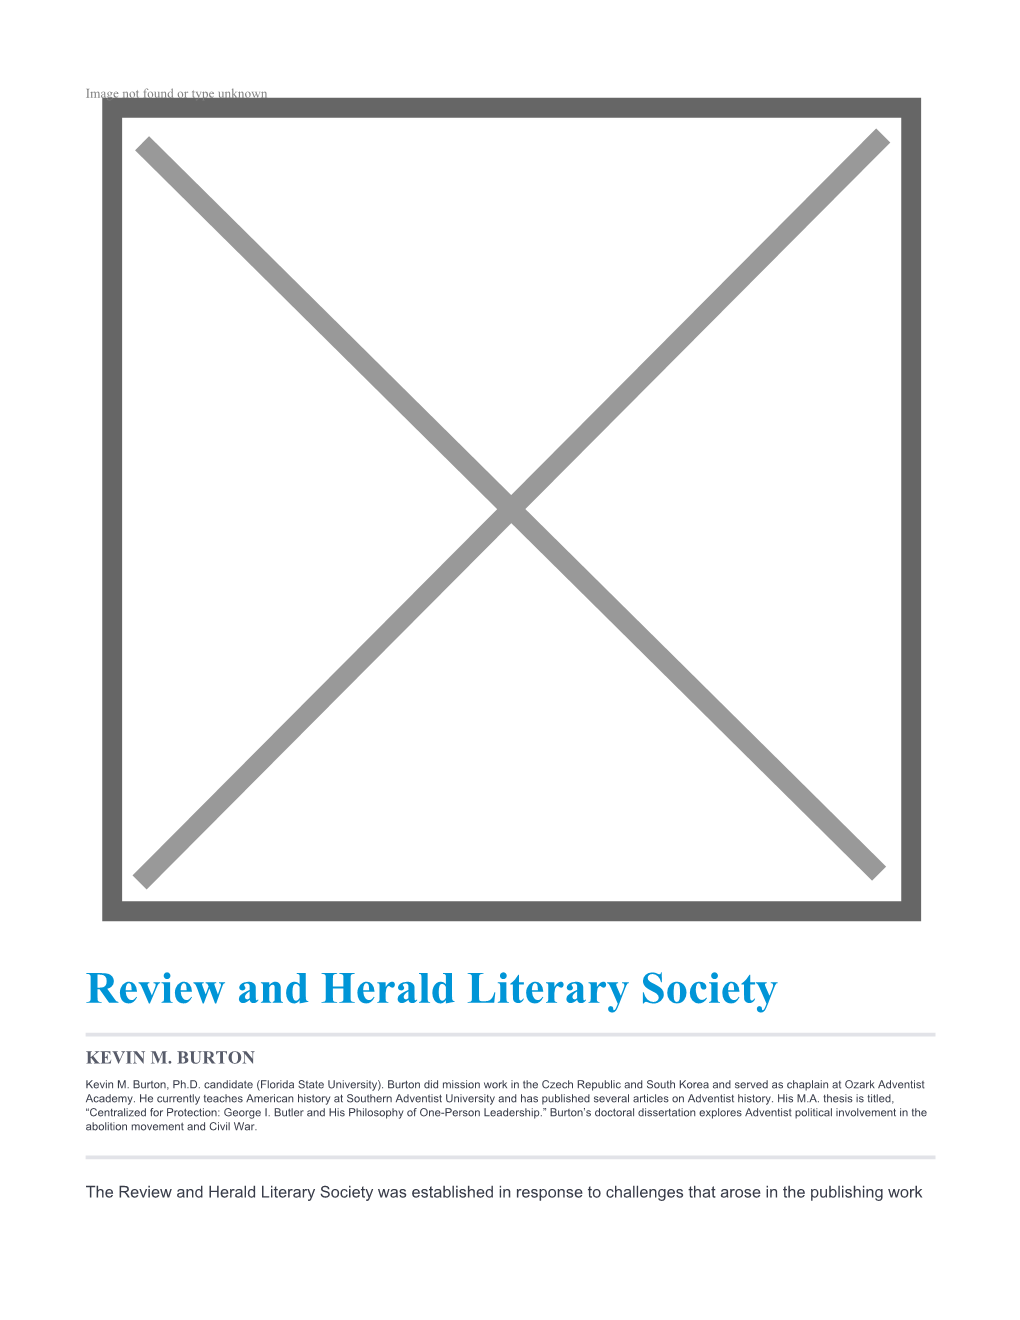 Review and Herald Literary Society